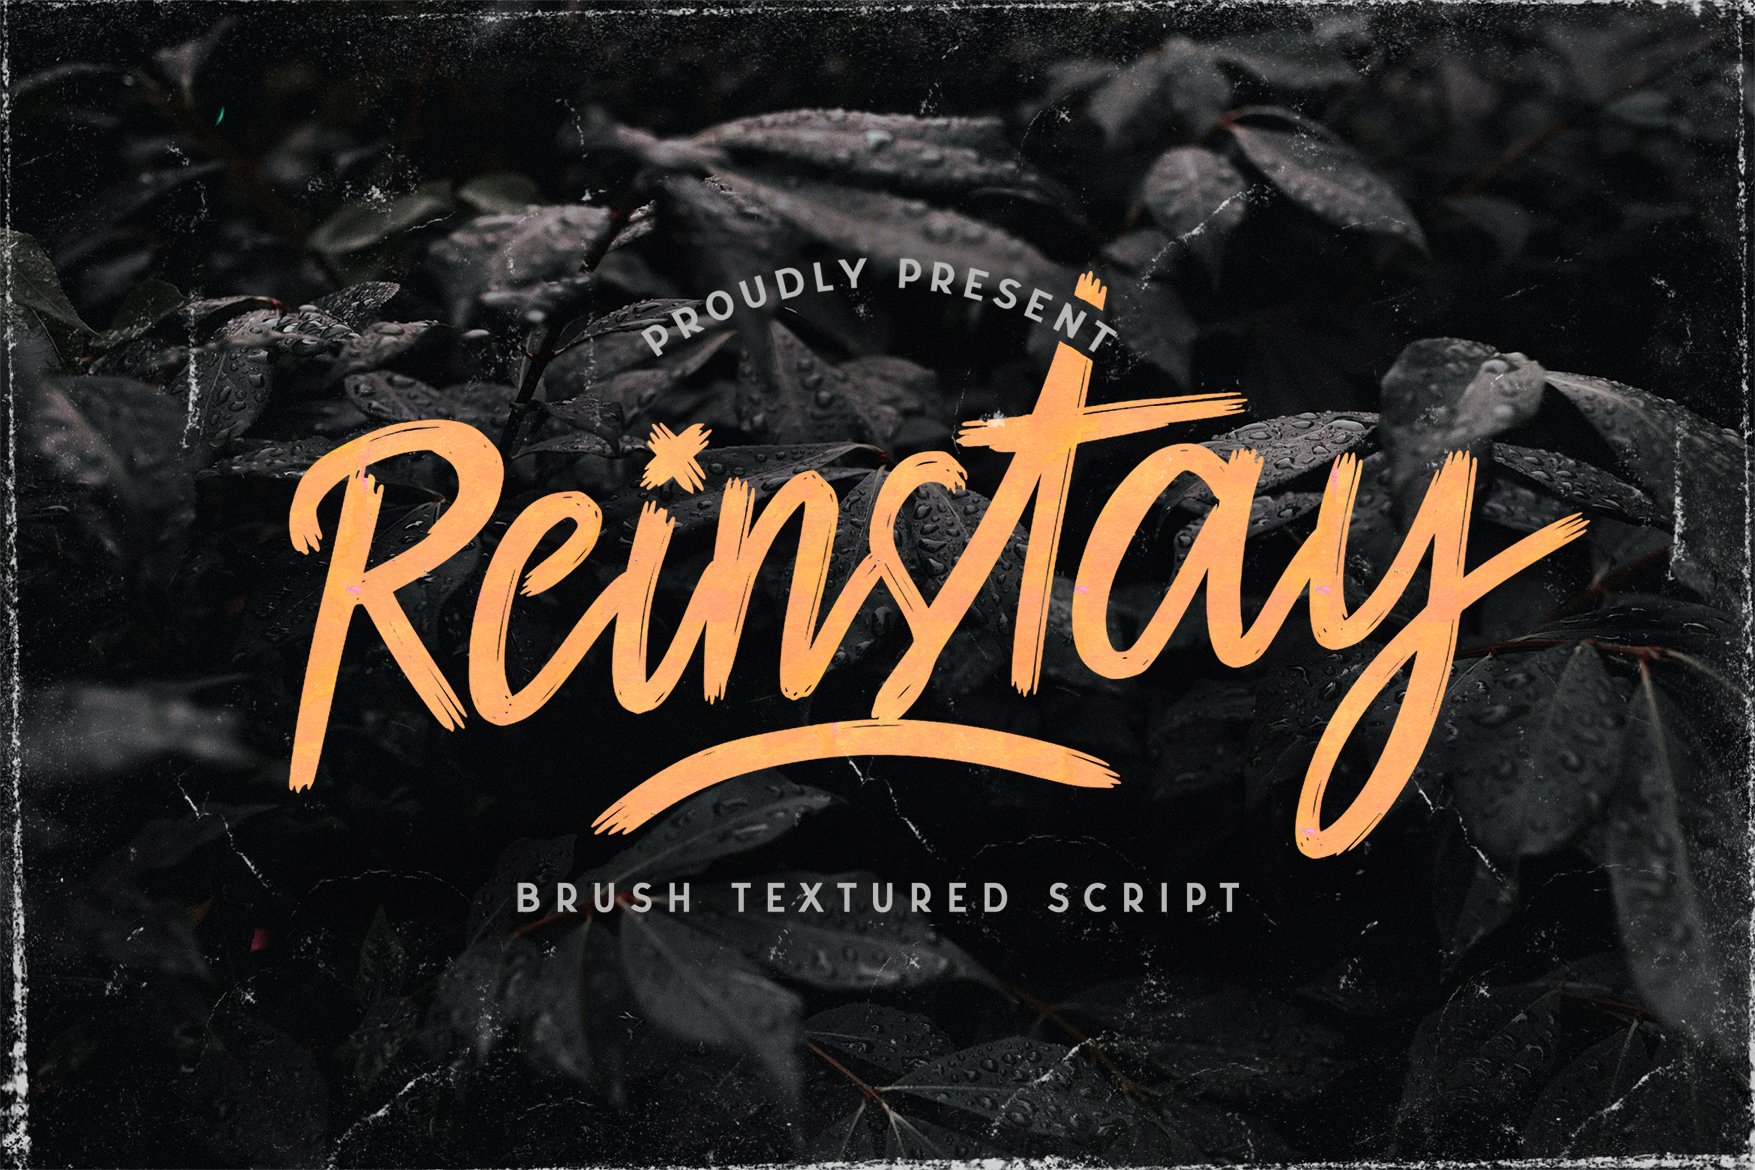 Reinstay - Brush Script Font cover image.